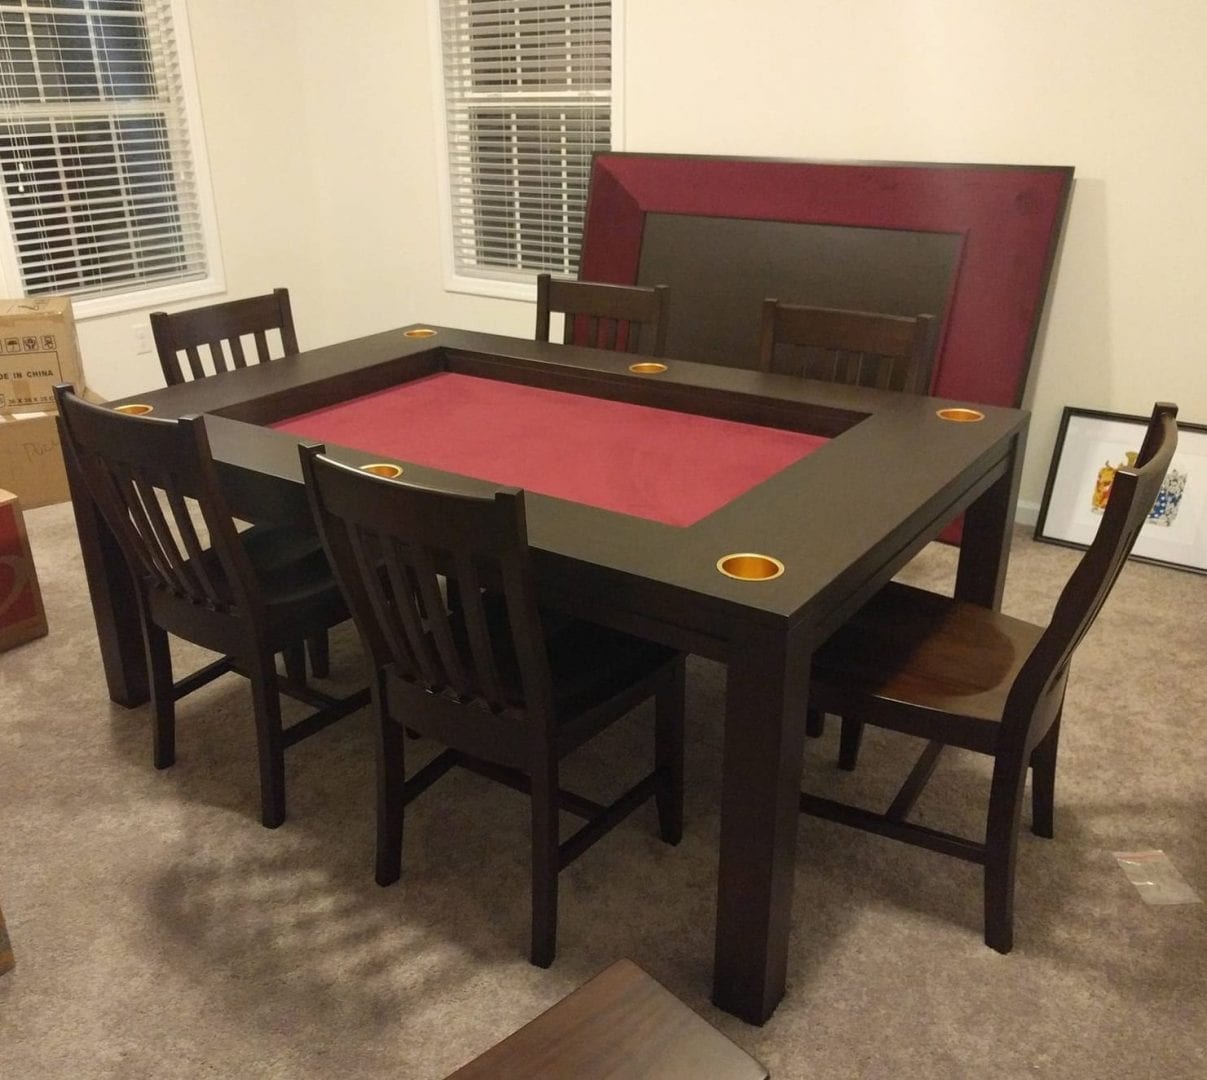 Dining Game Table: One Table for Everyday Dining and Game Night